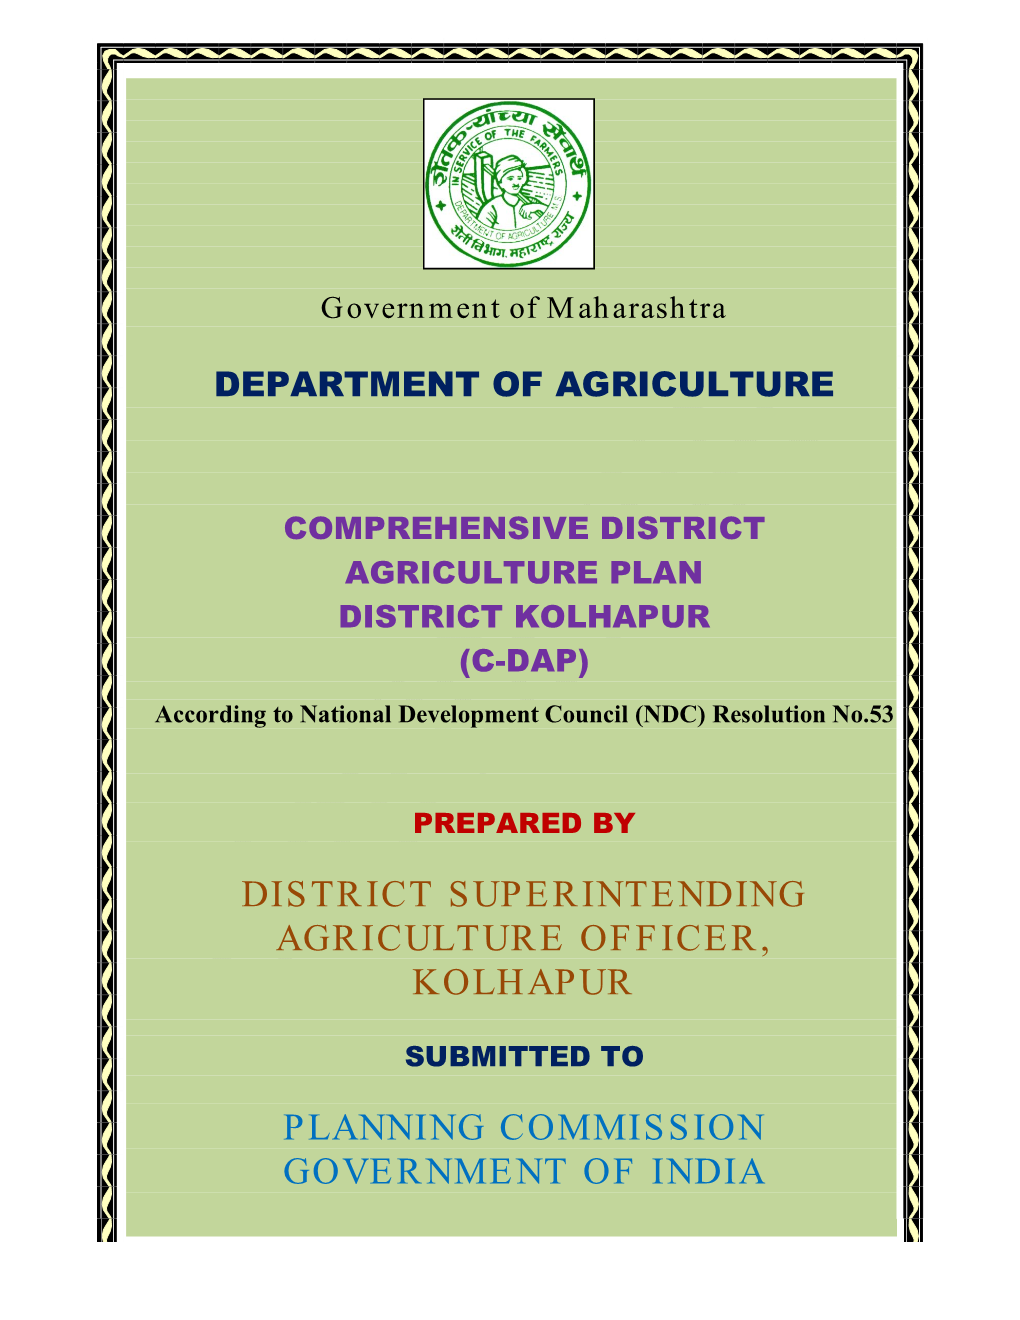 District Superintending Agriculture Officer, Kolhapur Planning Commission Government of India